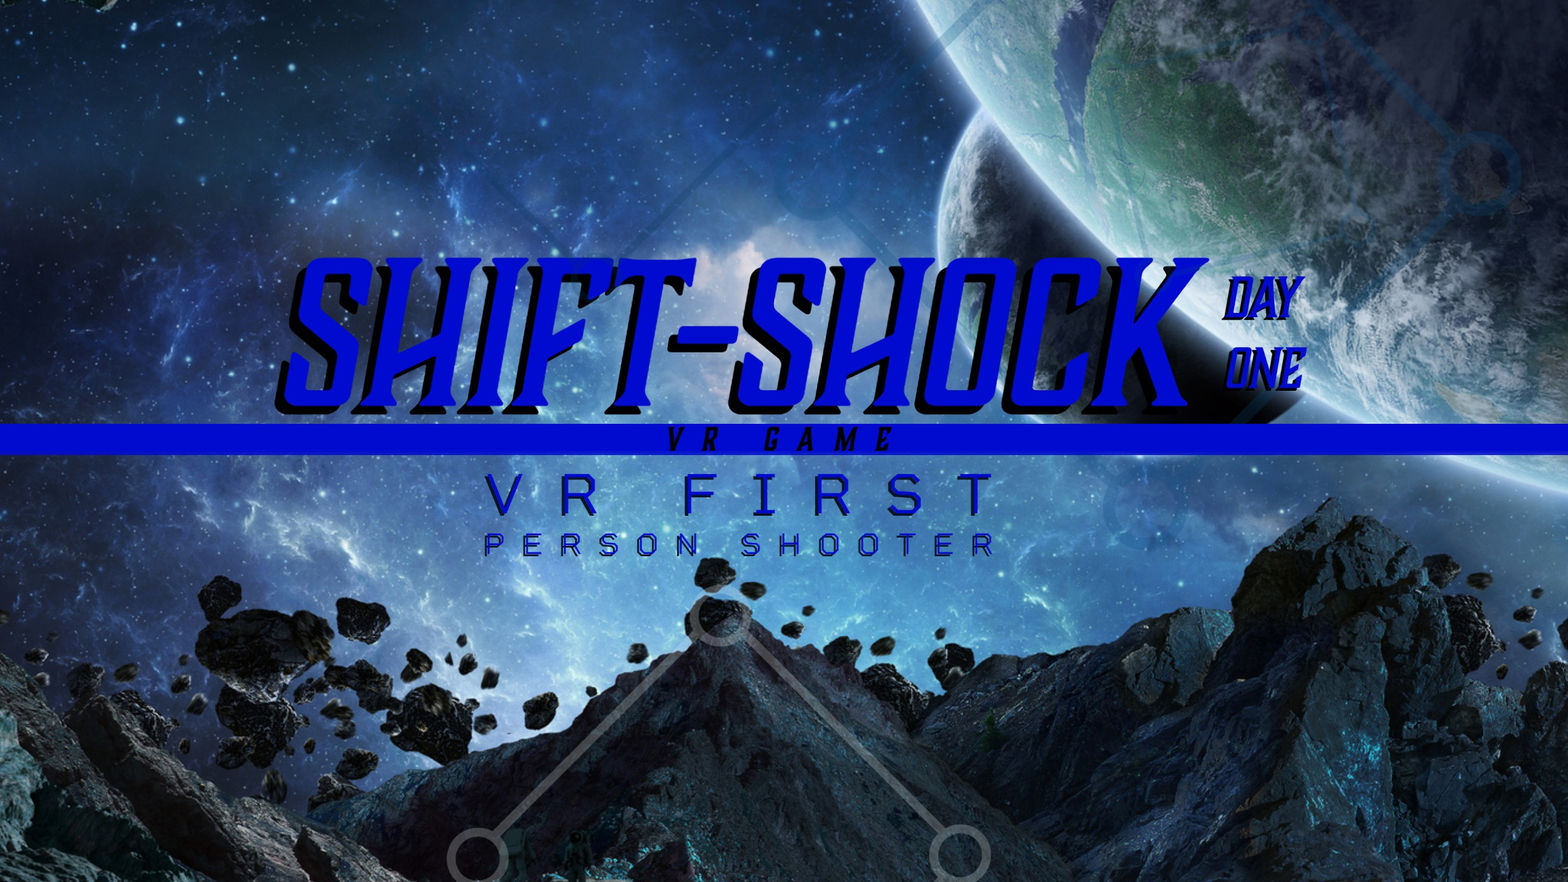 Shift-shock: Day One